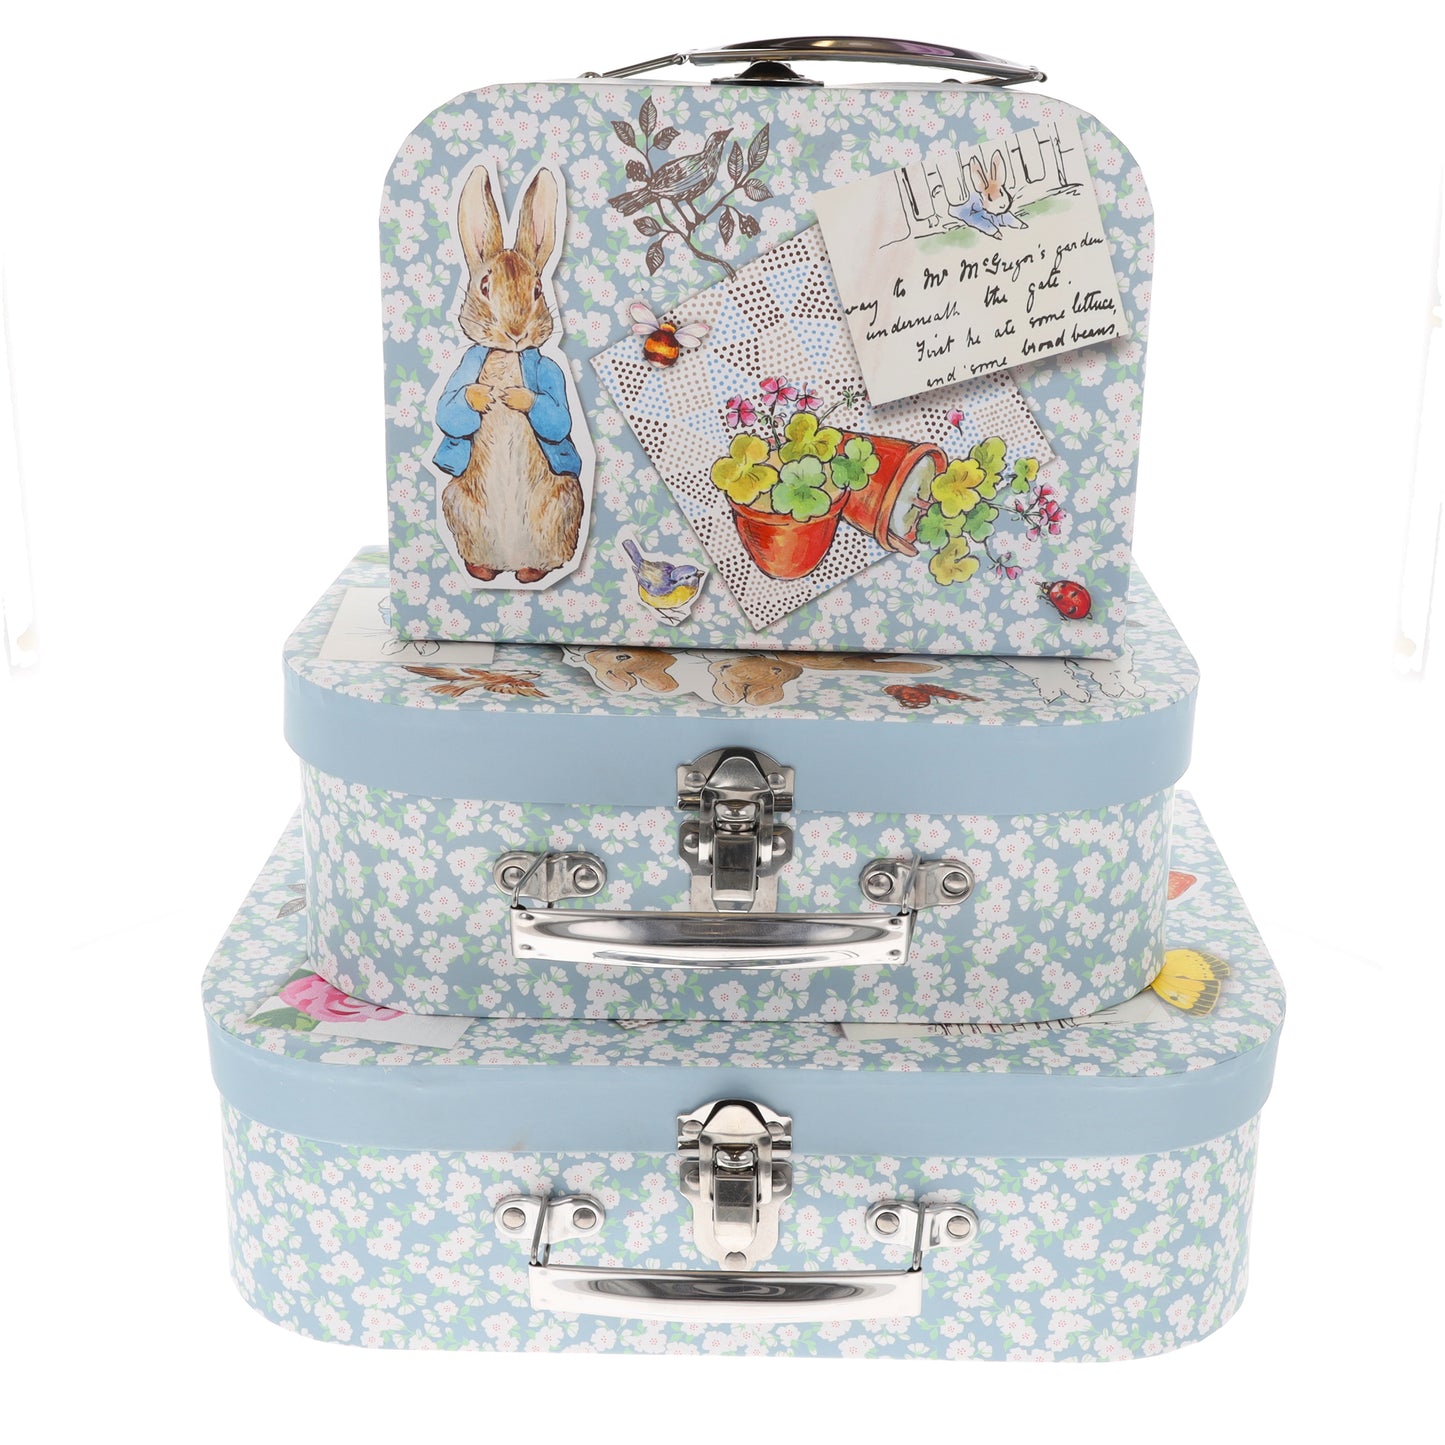 Personalised Storage Suitcase Filled Kids Gift Set  - Always Looking Good - Small Peter Rabbit  